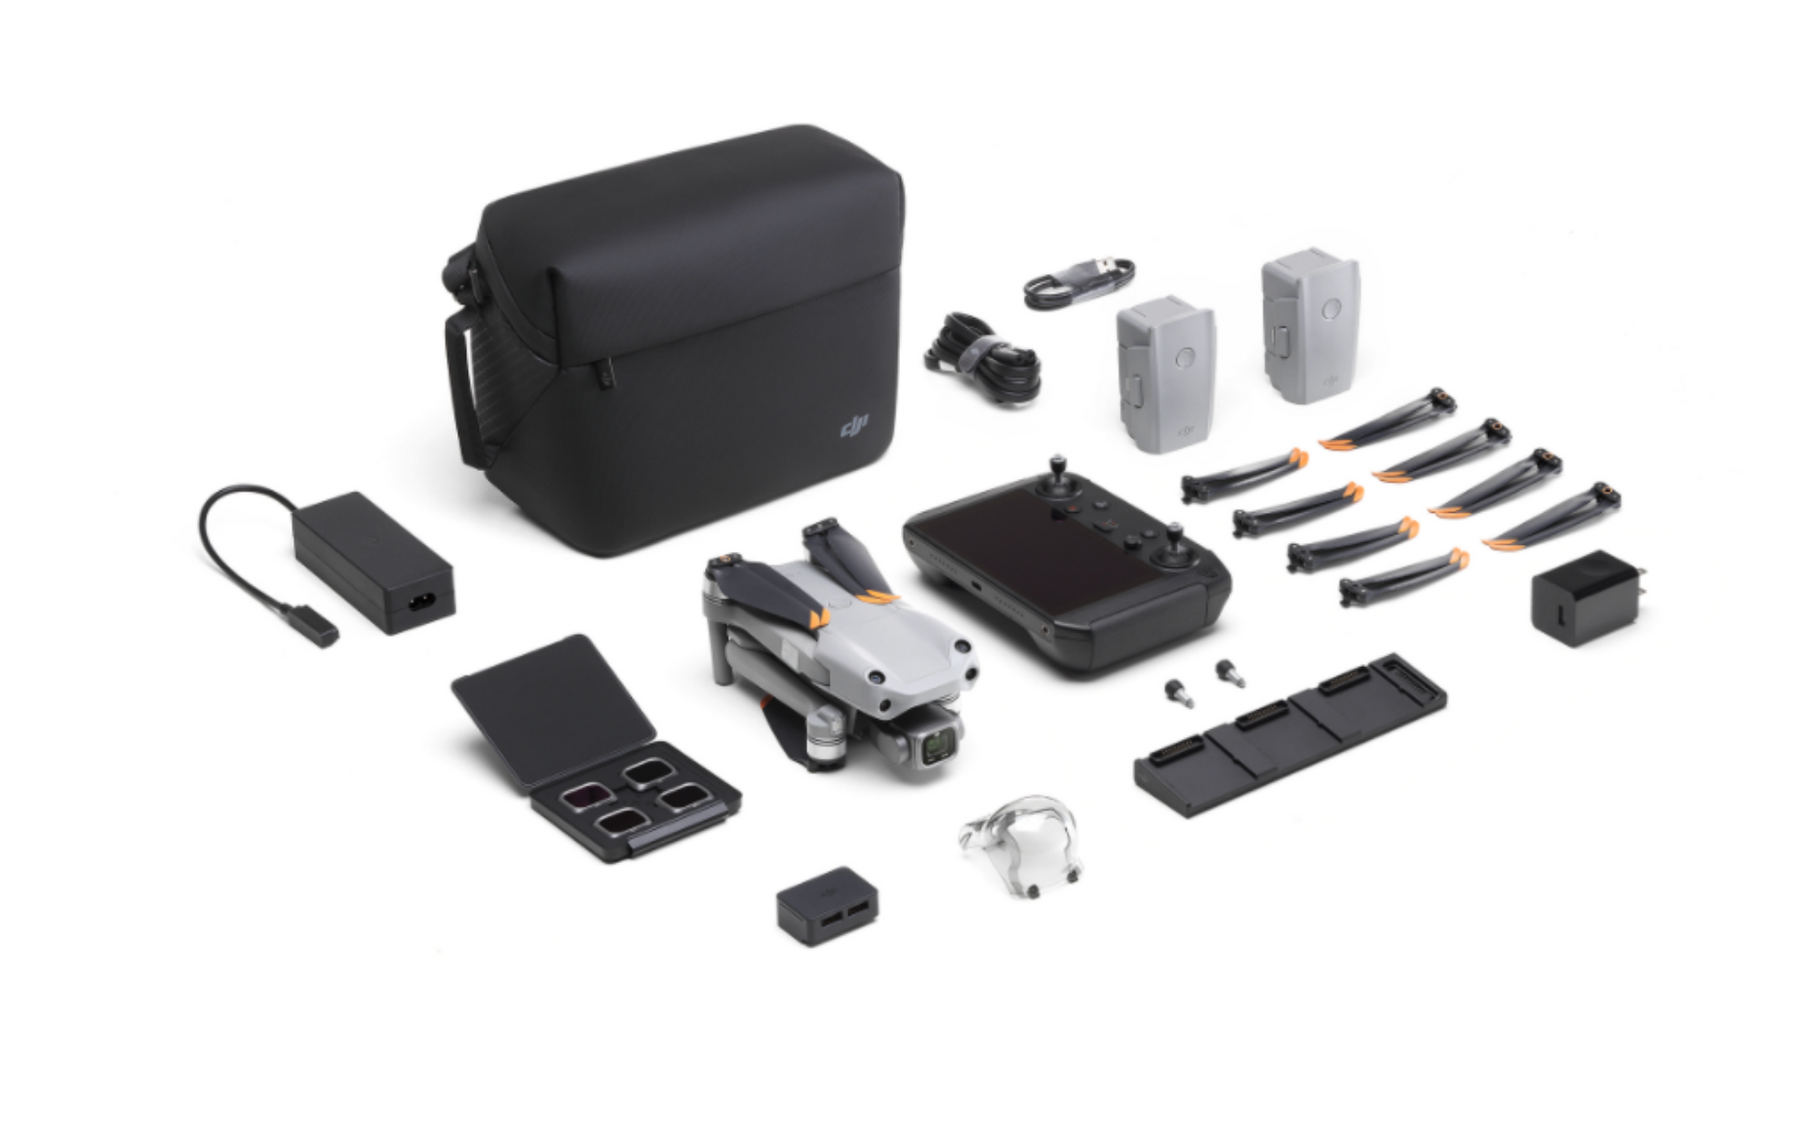 DJI Air 2S Fly More Smart Controller Combo - Open Box (Care Refresh included)